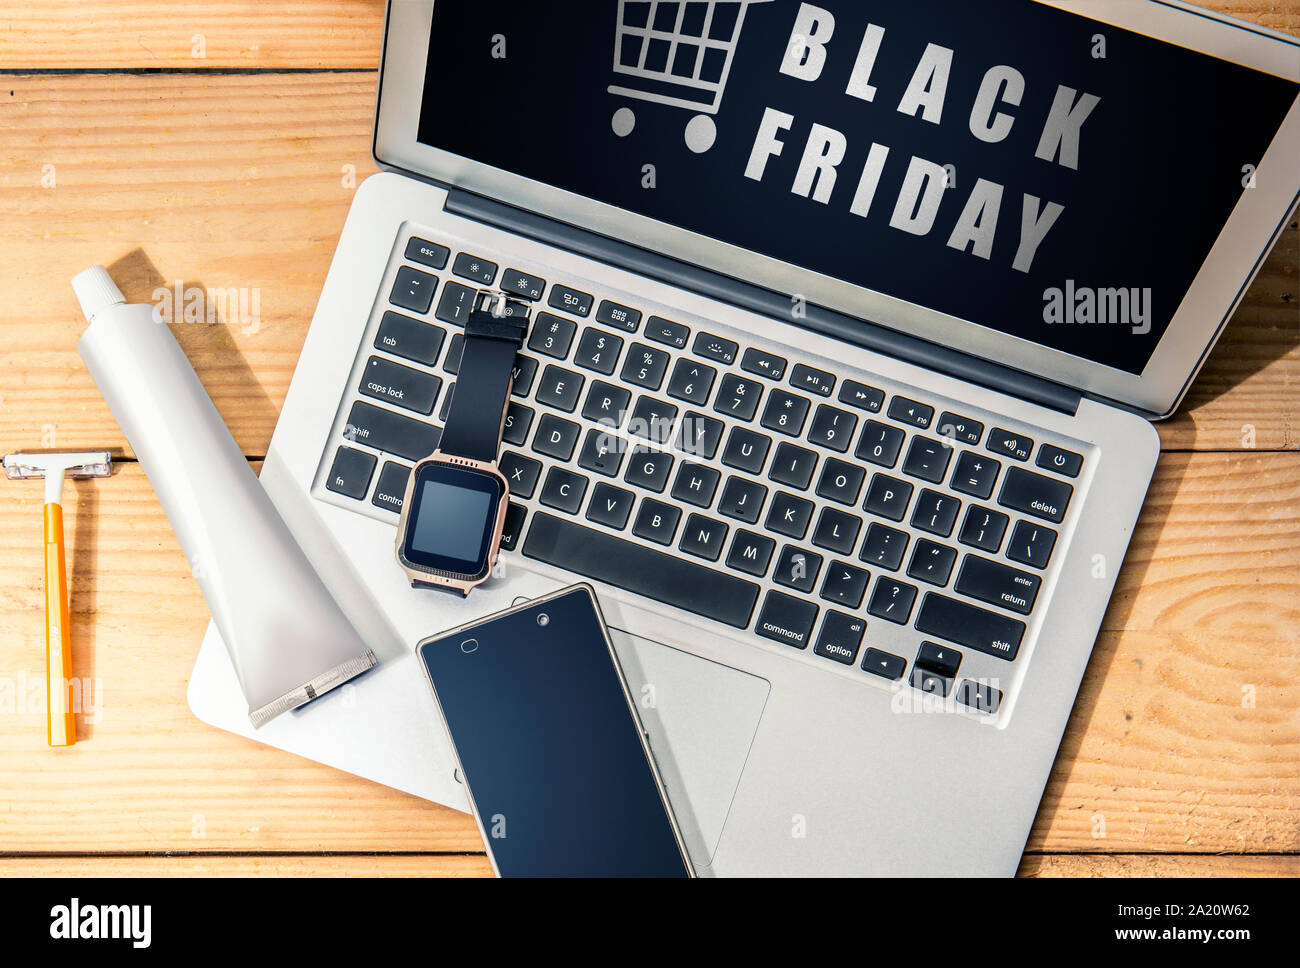 Black Friday Advert On The Laptop Screen On The Desk Black Friday